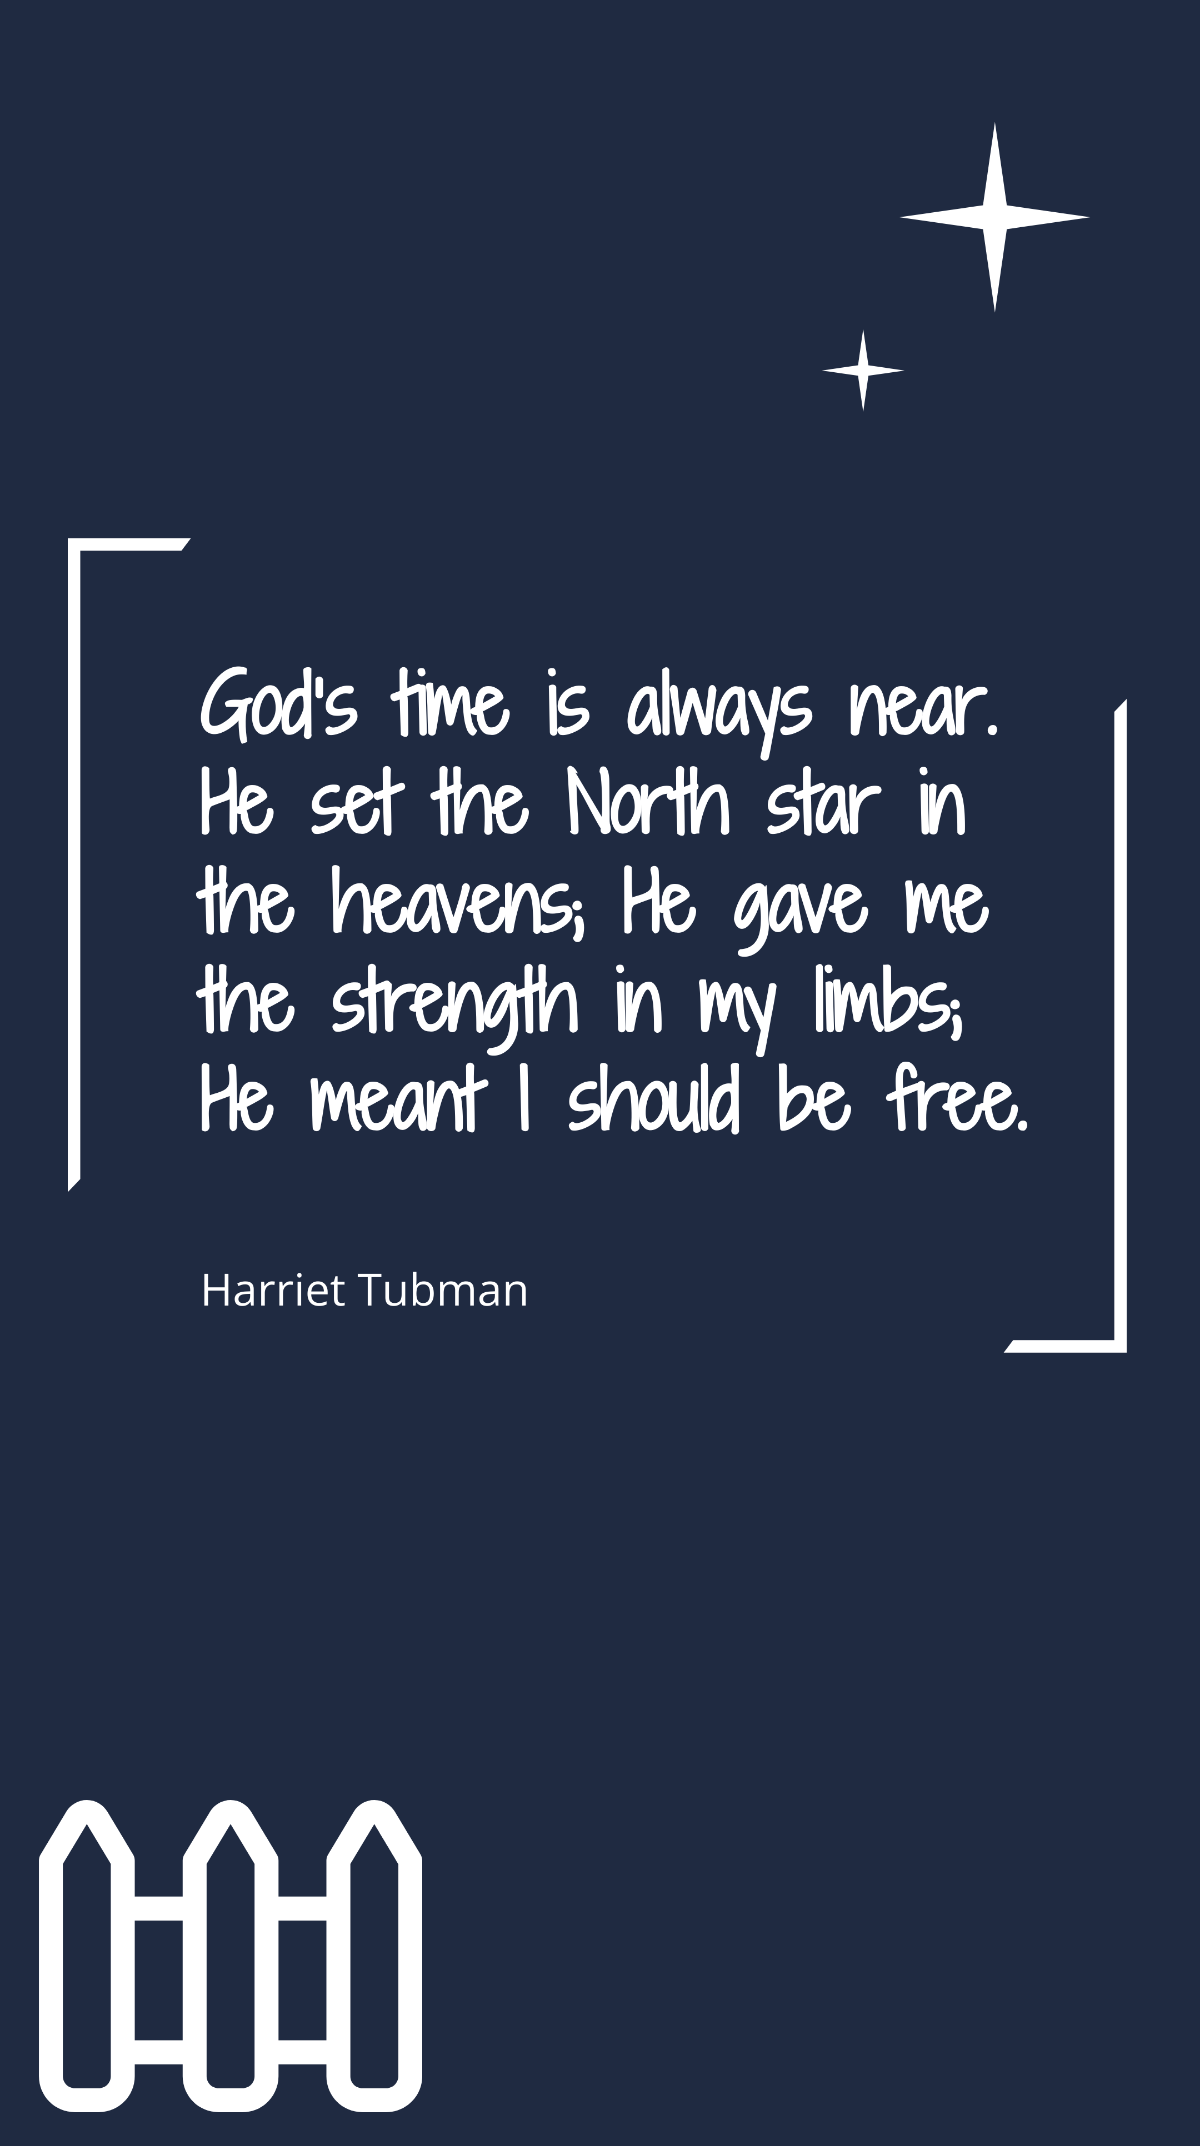 Harriet Tubman - God’s time is always near. He set the North star in the heavens; He gave me the strength in my limbs; He meant I should be free. Template